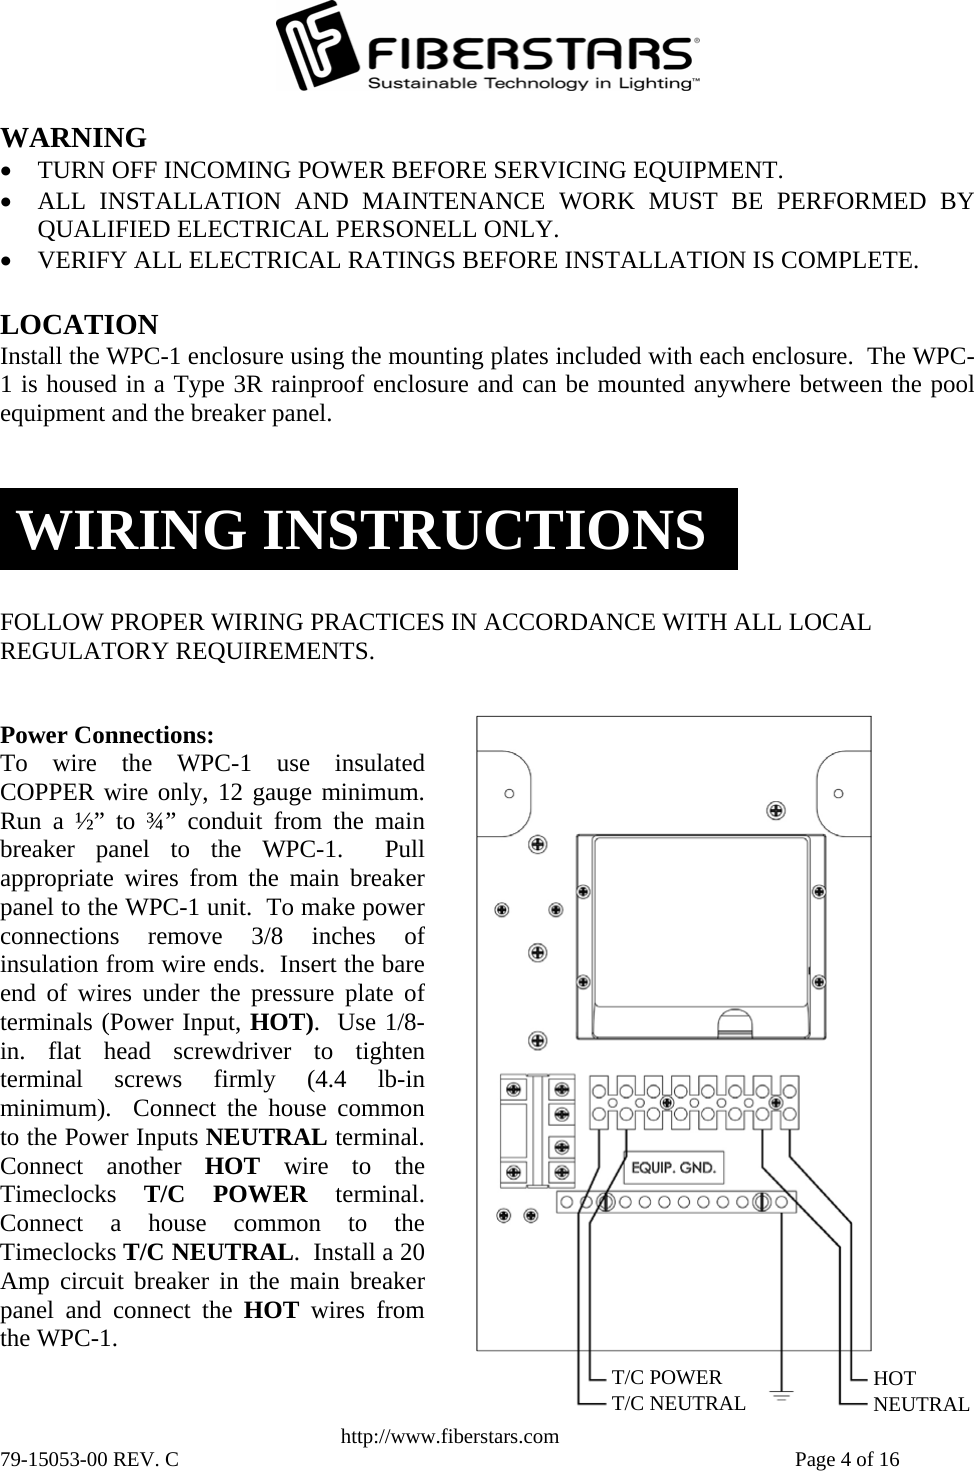   http://www.fiberstars.com 79-15053-00 REV. C    Page 4 of 16 HOTNEUTRAL T/C POWERT/C NEUTRAL Power Connections:  To wire the WPC-1 use insulatedCOPPER wire only, 12 gauge minimum.Run a ½” to ¾” conduit from the mainbreaker panel to the WPC-1.  Pullappropriate wires from the main breakerpanel to the WPC-1 unit.  To make powerconnections remove 3/8 inches of insulation from wire ends.  Insert the bare end of wires under the pressure plate ofterminals (Power Input, HOT).  Use 1/8-in. flat head screwdriver to tightenterminal screws firmly (4.4 lb-inminimum).  Connect the house commonto the Power Inputs NEUTRAL terminal.Connect another HOT  wire to theTimeclocks  T/C POWER terminal.Connect a house common to theTimeclocks T/C NEUTRAL.  Install a 20Amp circuit breaker in the main breakerpanel and connect the HOT wires from the WPC-1. LOCATION Install the WPC-1 enclosure using the mounting plates included with each enclosure.  The WPC-1 is housed in a Type 3R rainproof enclosure and can be mounted anywhere between the poolequipment and the breaker panel. WIRING INSTRUCTIONSFOLLOW PROPER WIRING PRACTICES IN ACCORDANCE WITH ALL LOCAL REGULATORY REQUIREMENTS. WARNING • TURN OFF INCOMING POWER BEFORE SERVICING EQUIPMENT.  • ALL INSTALLATION AND MAINTENANCE WORK MUST BE PERFORMED BYQUALIFIED ELECTRICAL PERSONELL ONLY. • VERIFY ALL ELECTRICAL RATINGS BEFORE INSTALLATION IS COMPLETE. 